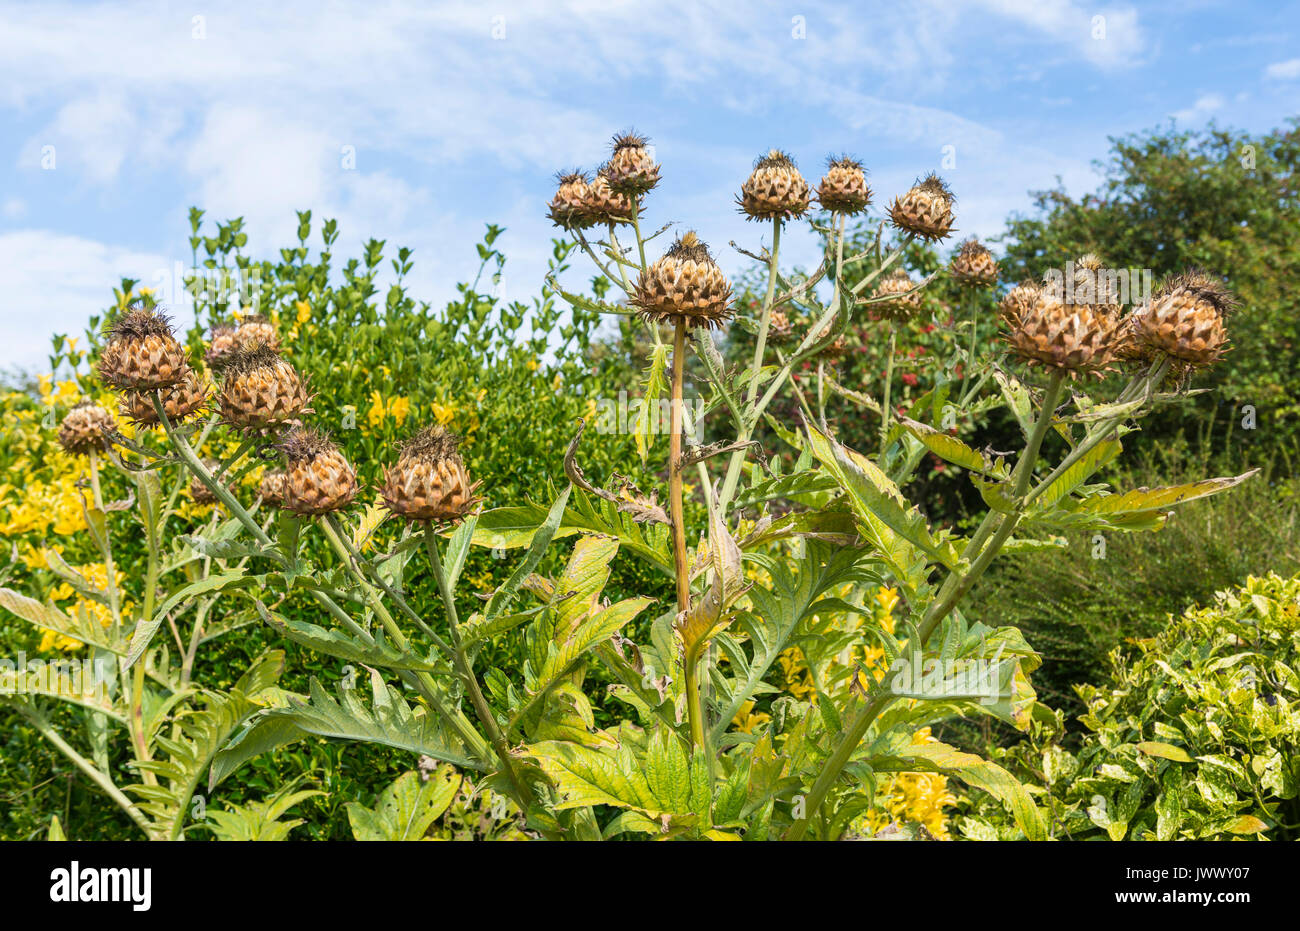 Artichoke Thistle (Cynara cardunculus) plant in a park in Summer in the UK. Stock Photo